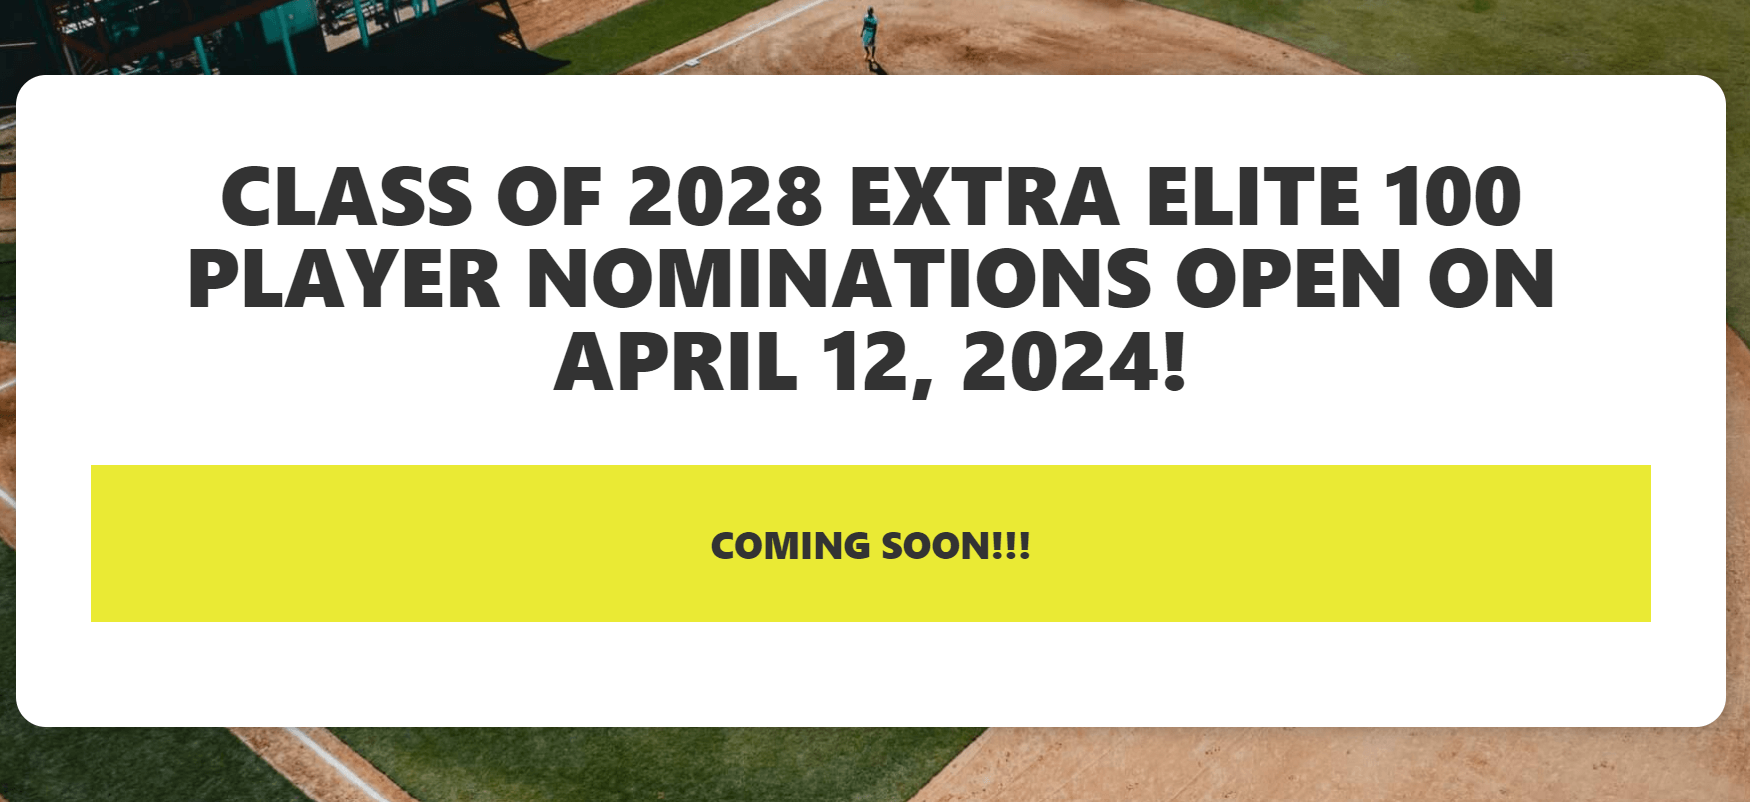 Class of 2028 Nominations Open April 12, 2024